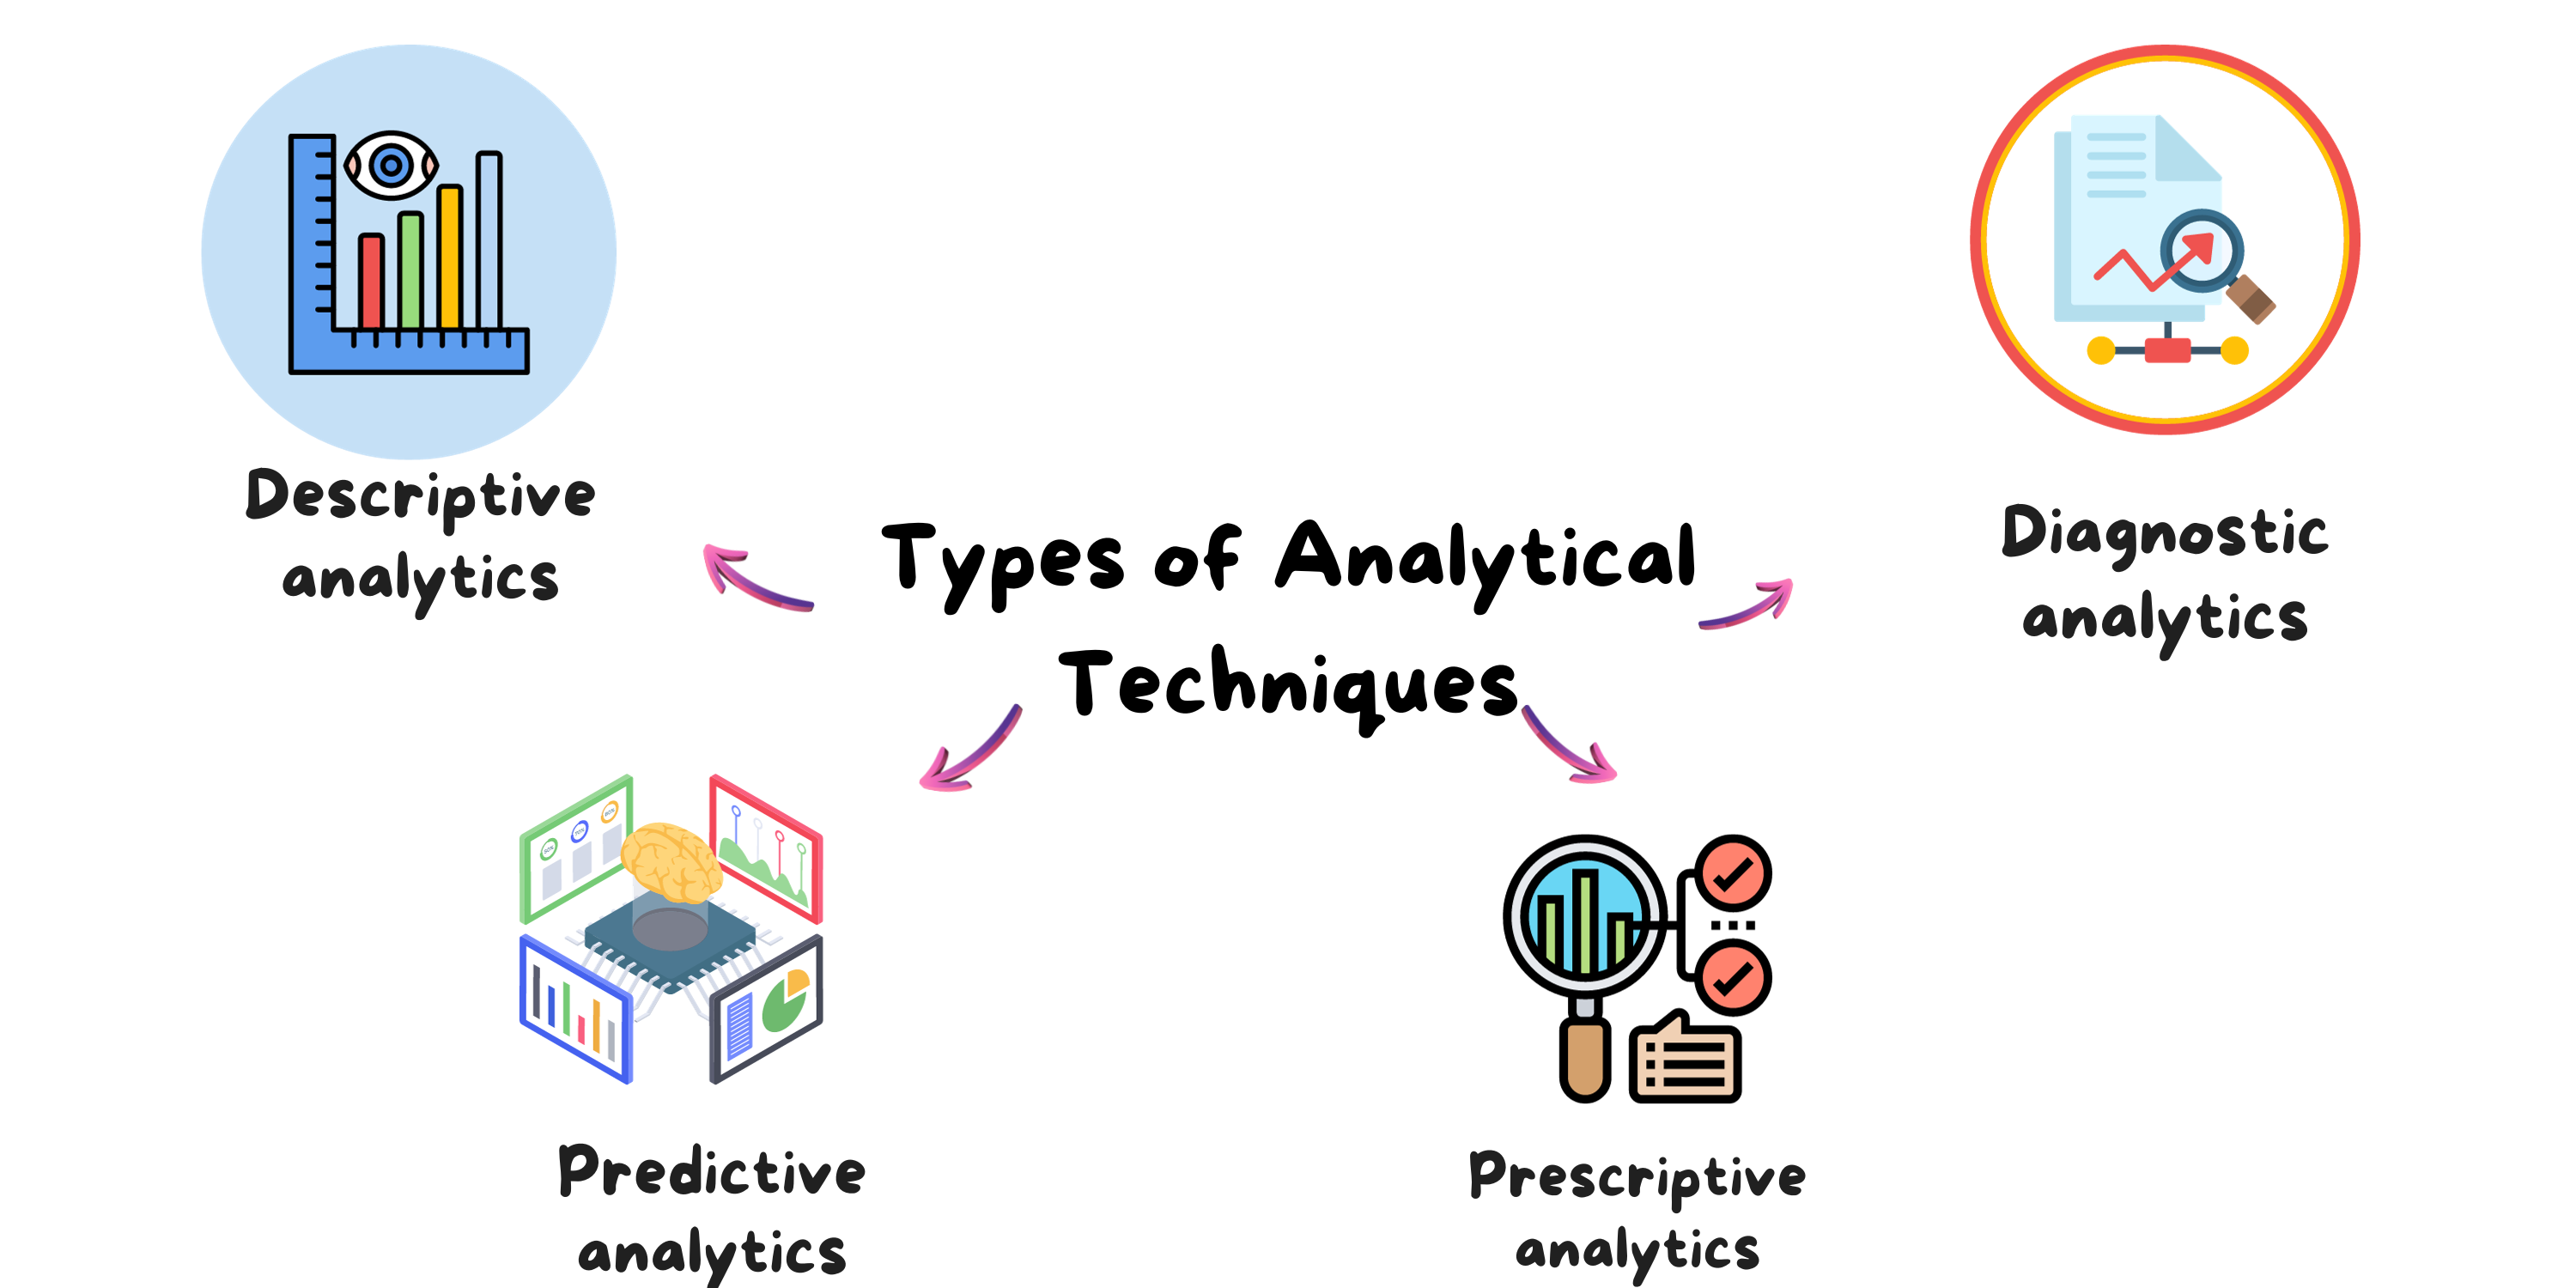 Types of Analytical Techniques